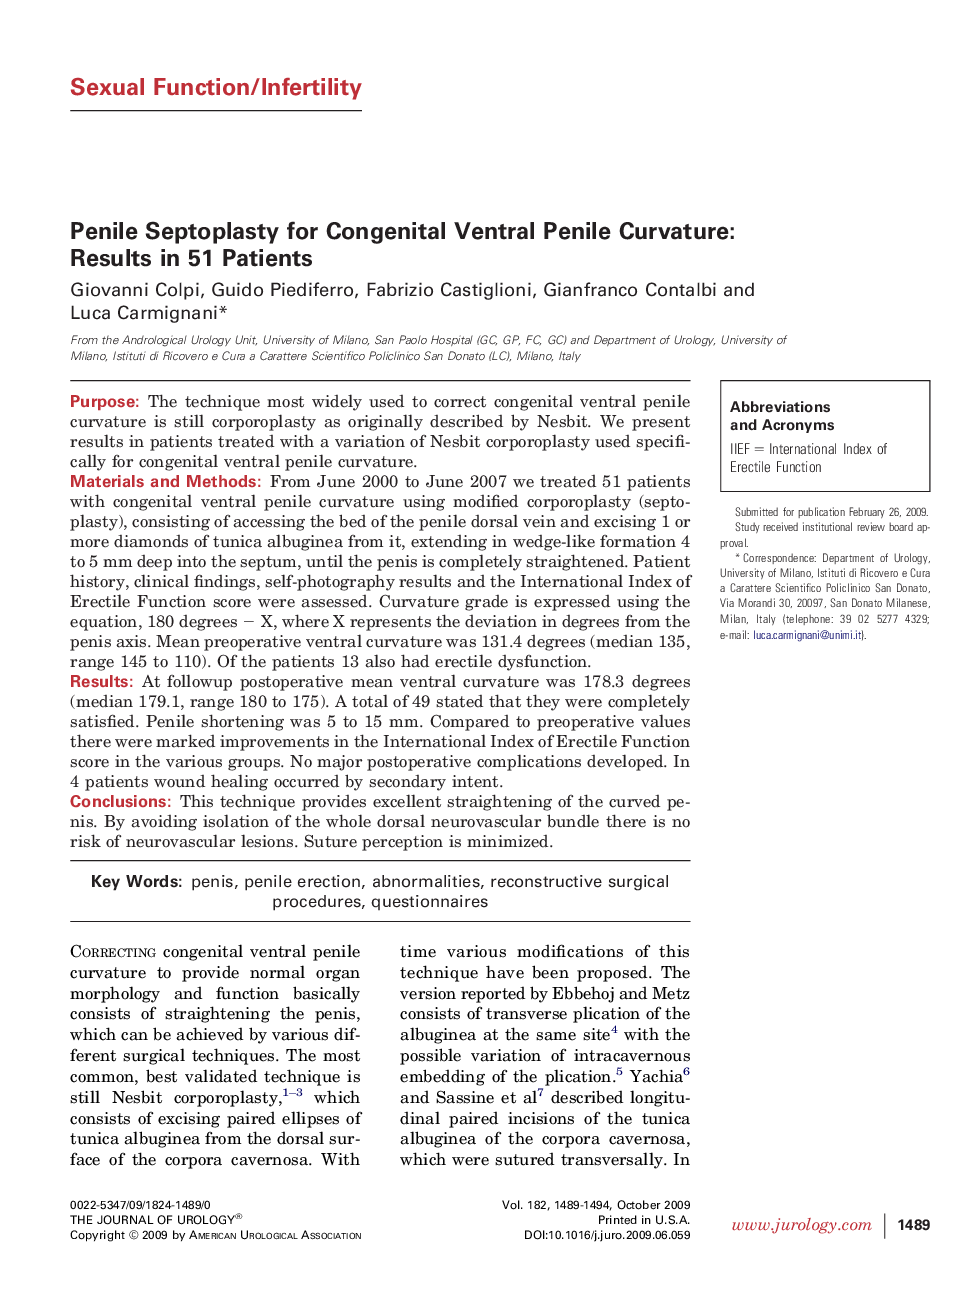 Penile Septoplasty for Congenital Ventral Penile Curvature: Results in 51 Patients 